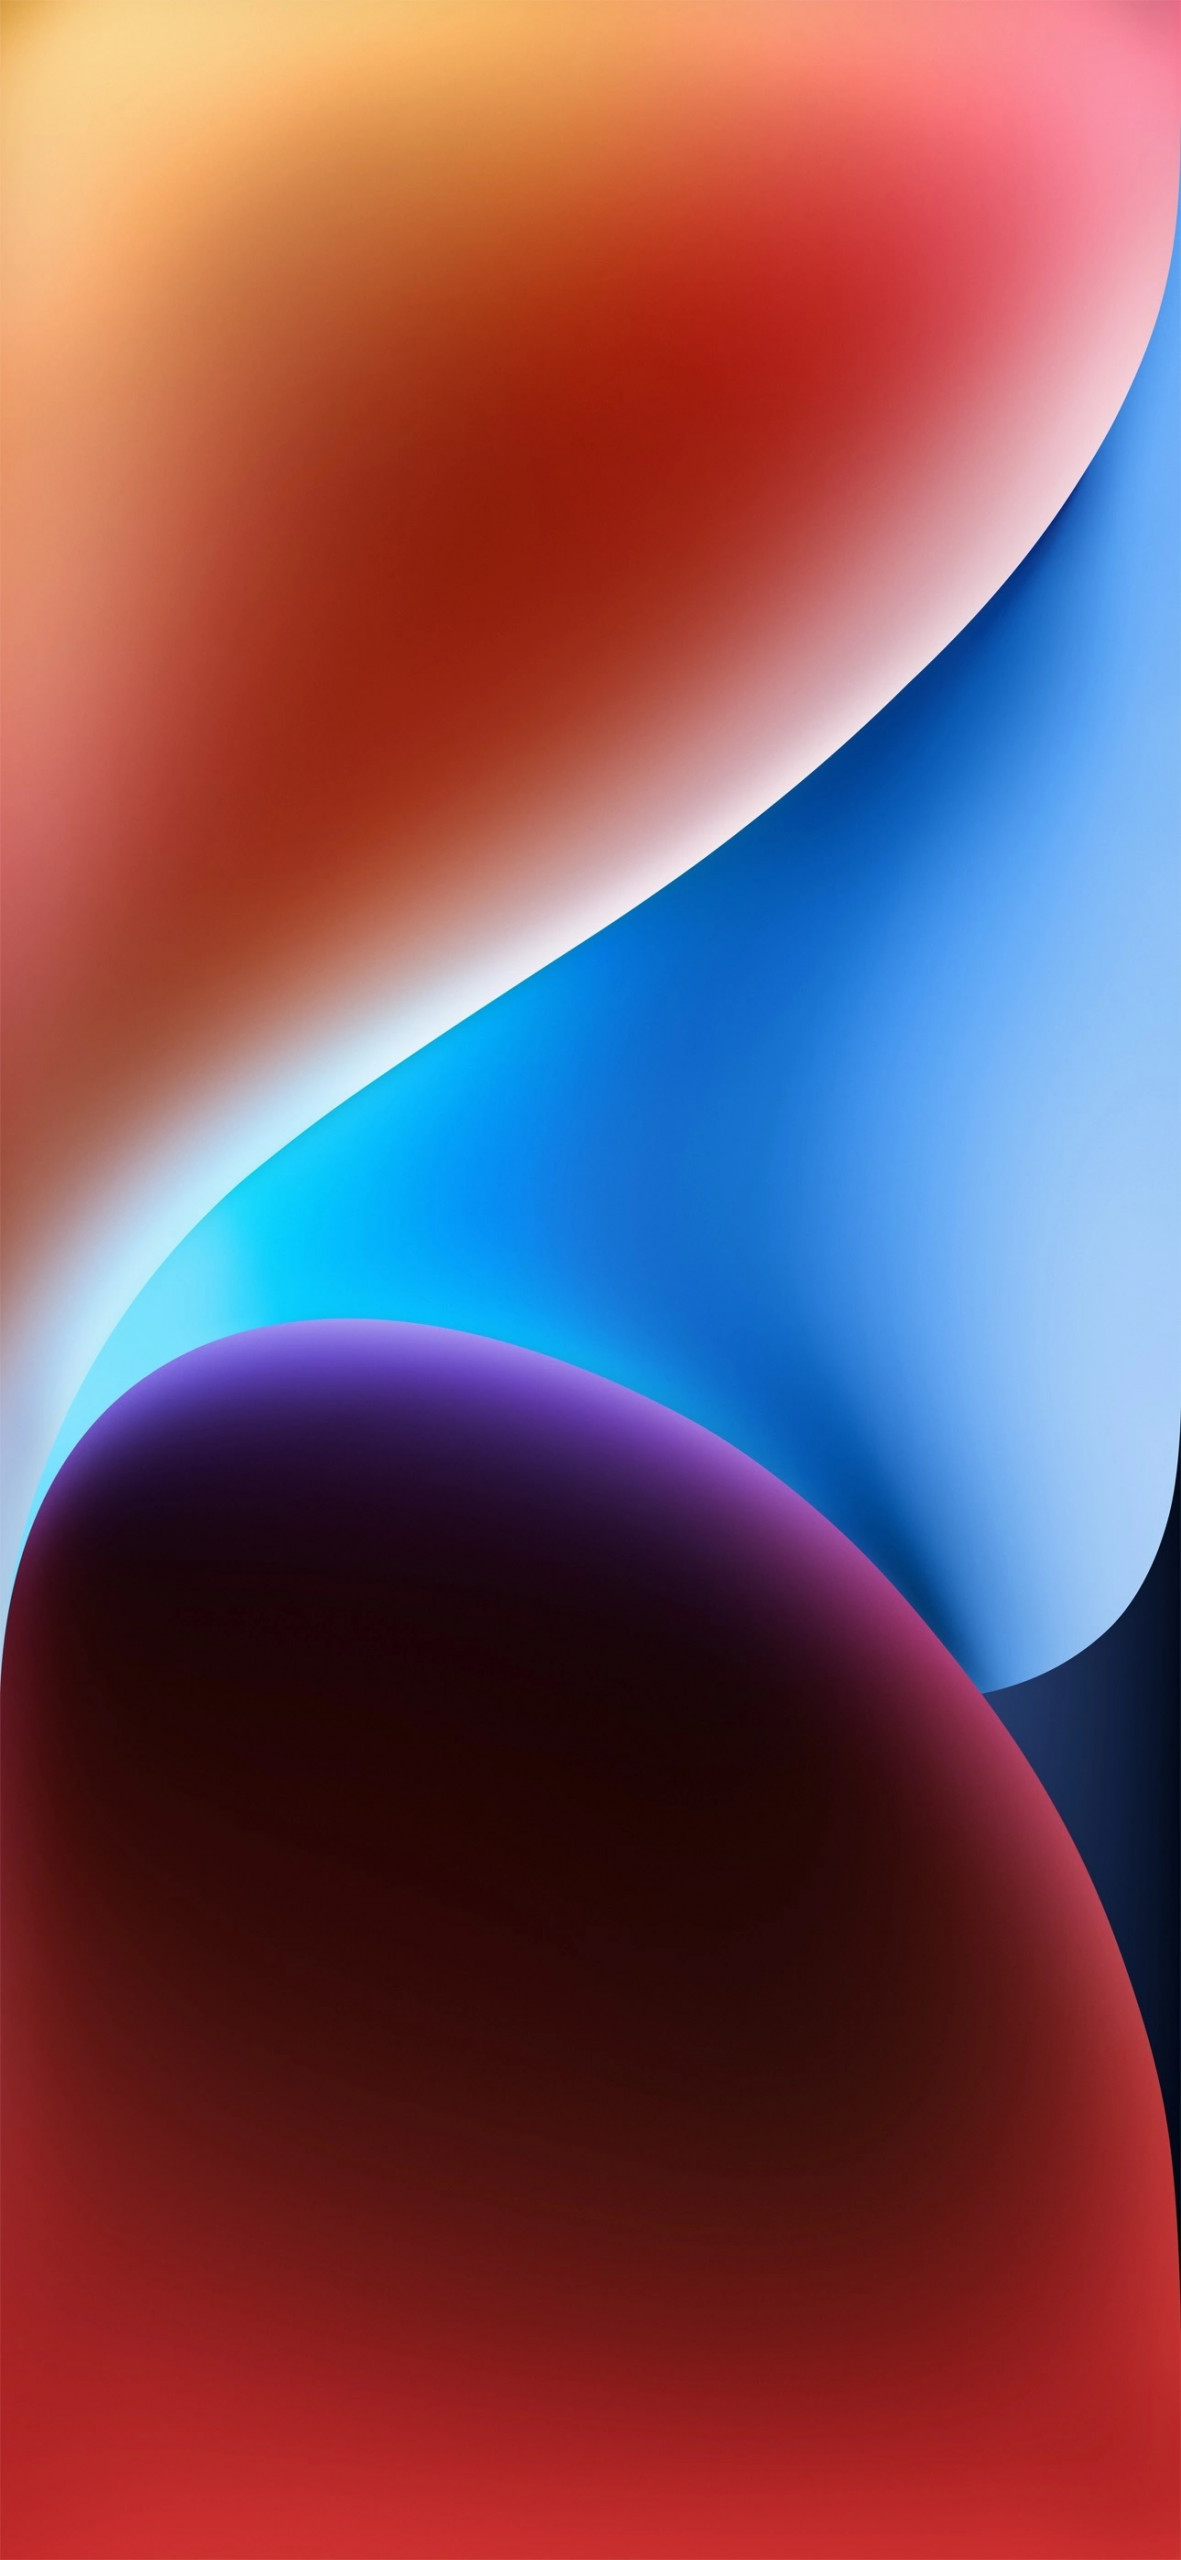 Iphone 14 Pro Wallpaper 7 Scaled -How To Get The New Ios 14 Wallpapers On Your Iphone